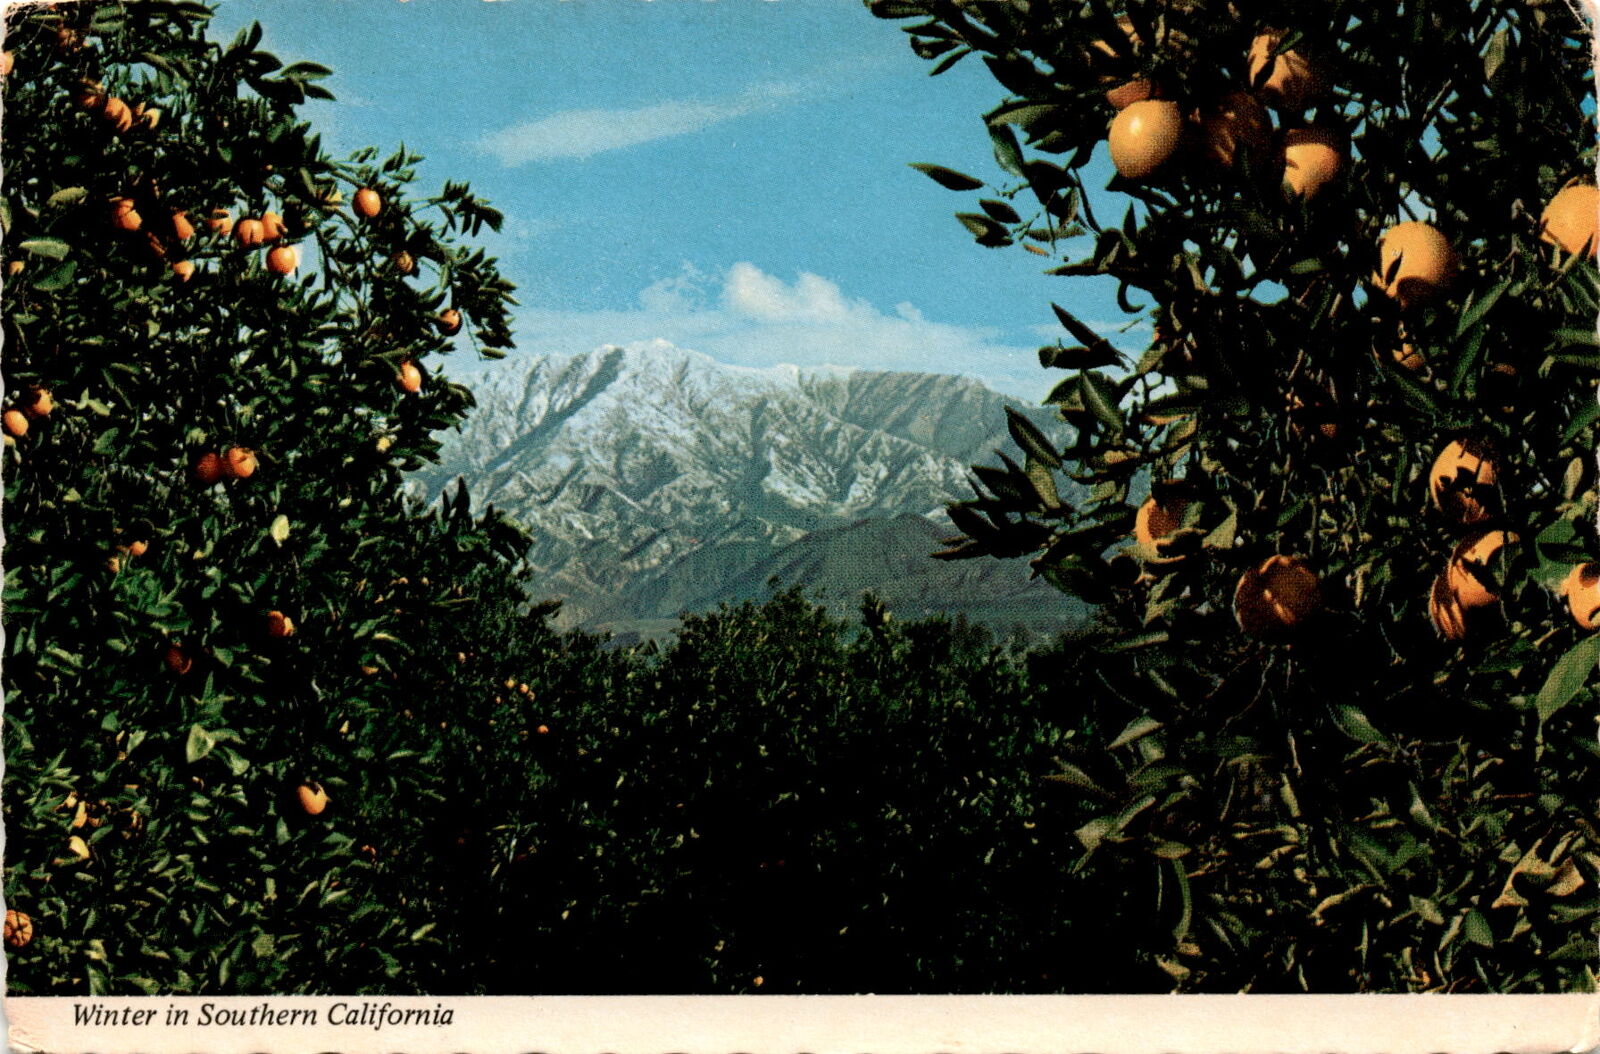 Winter, Southern California, orange groves, snow-capped mountains, Postcard